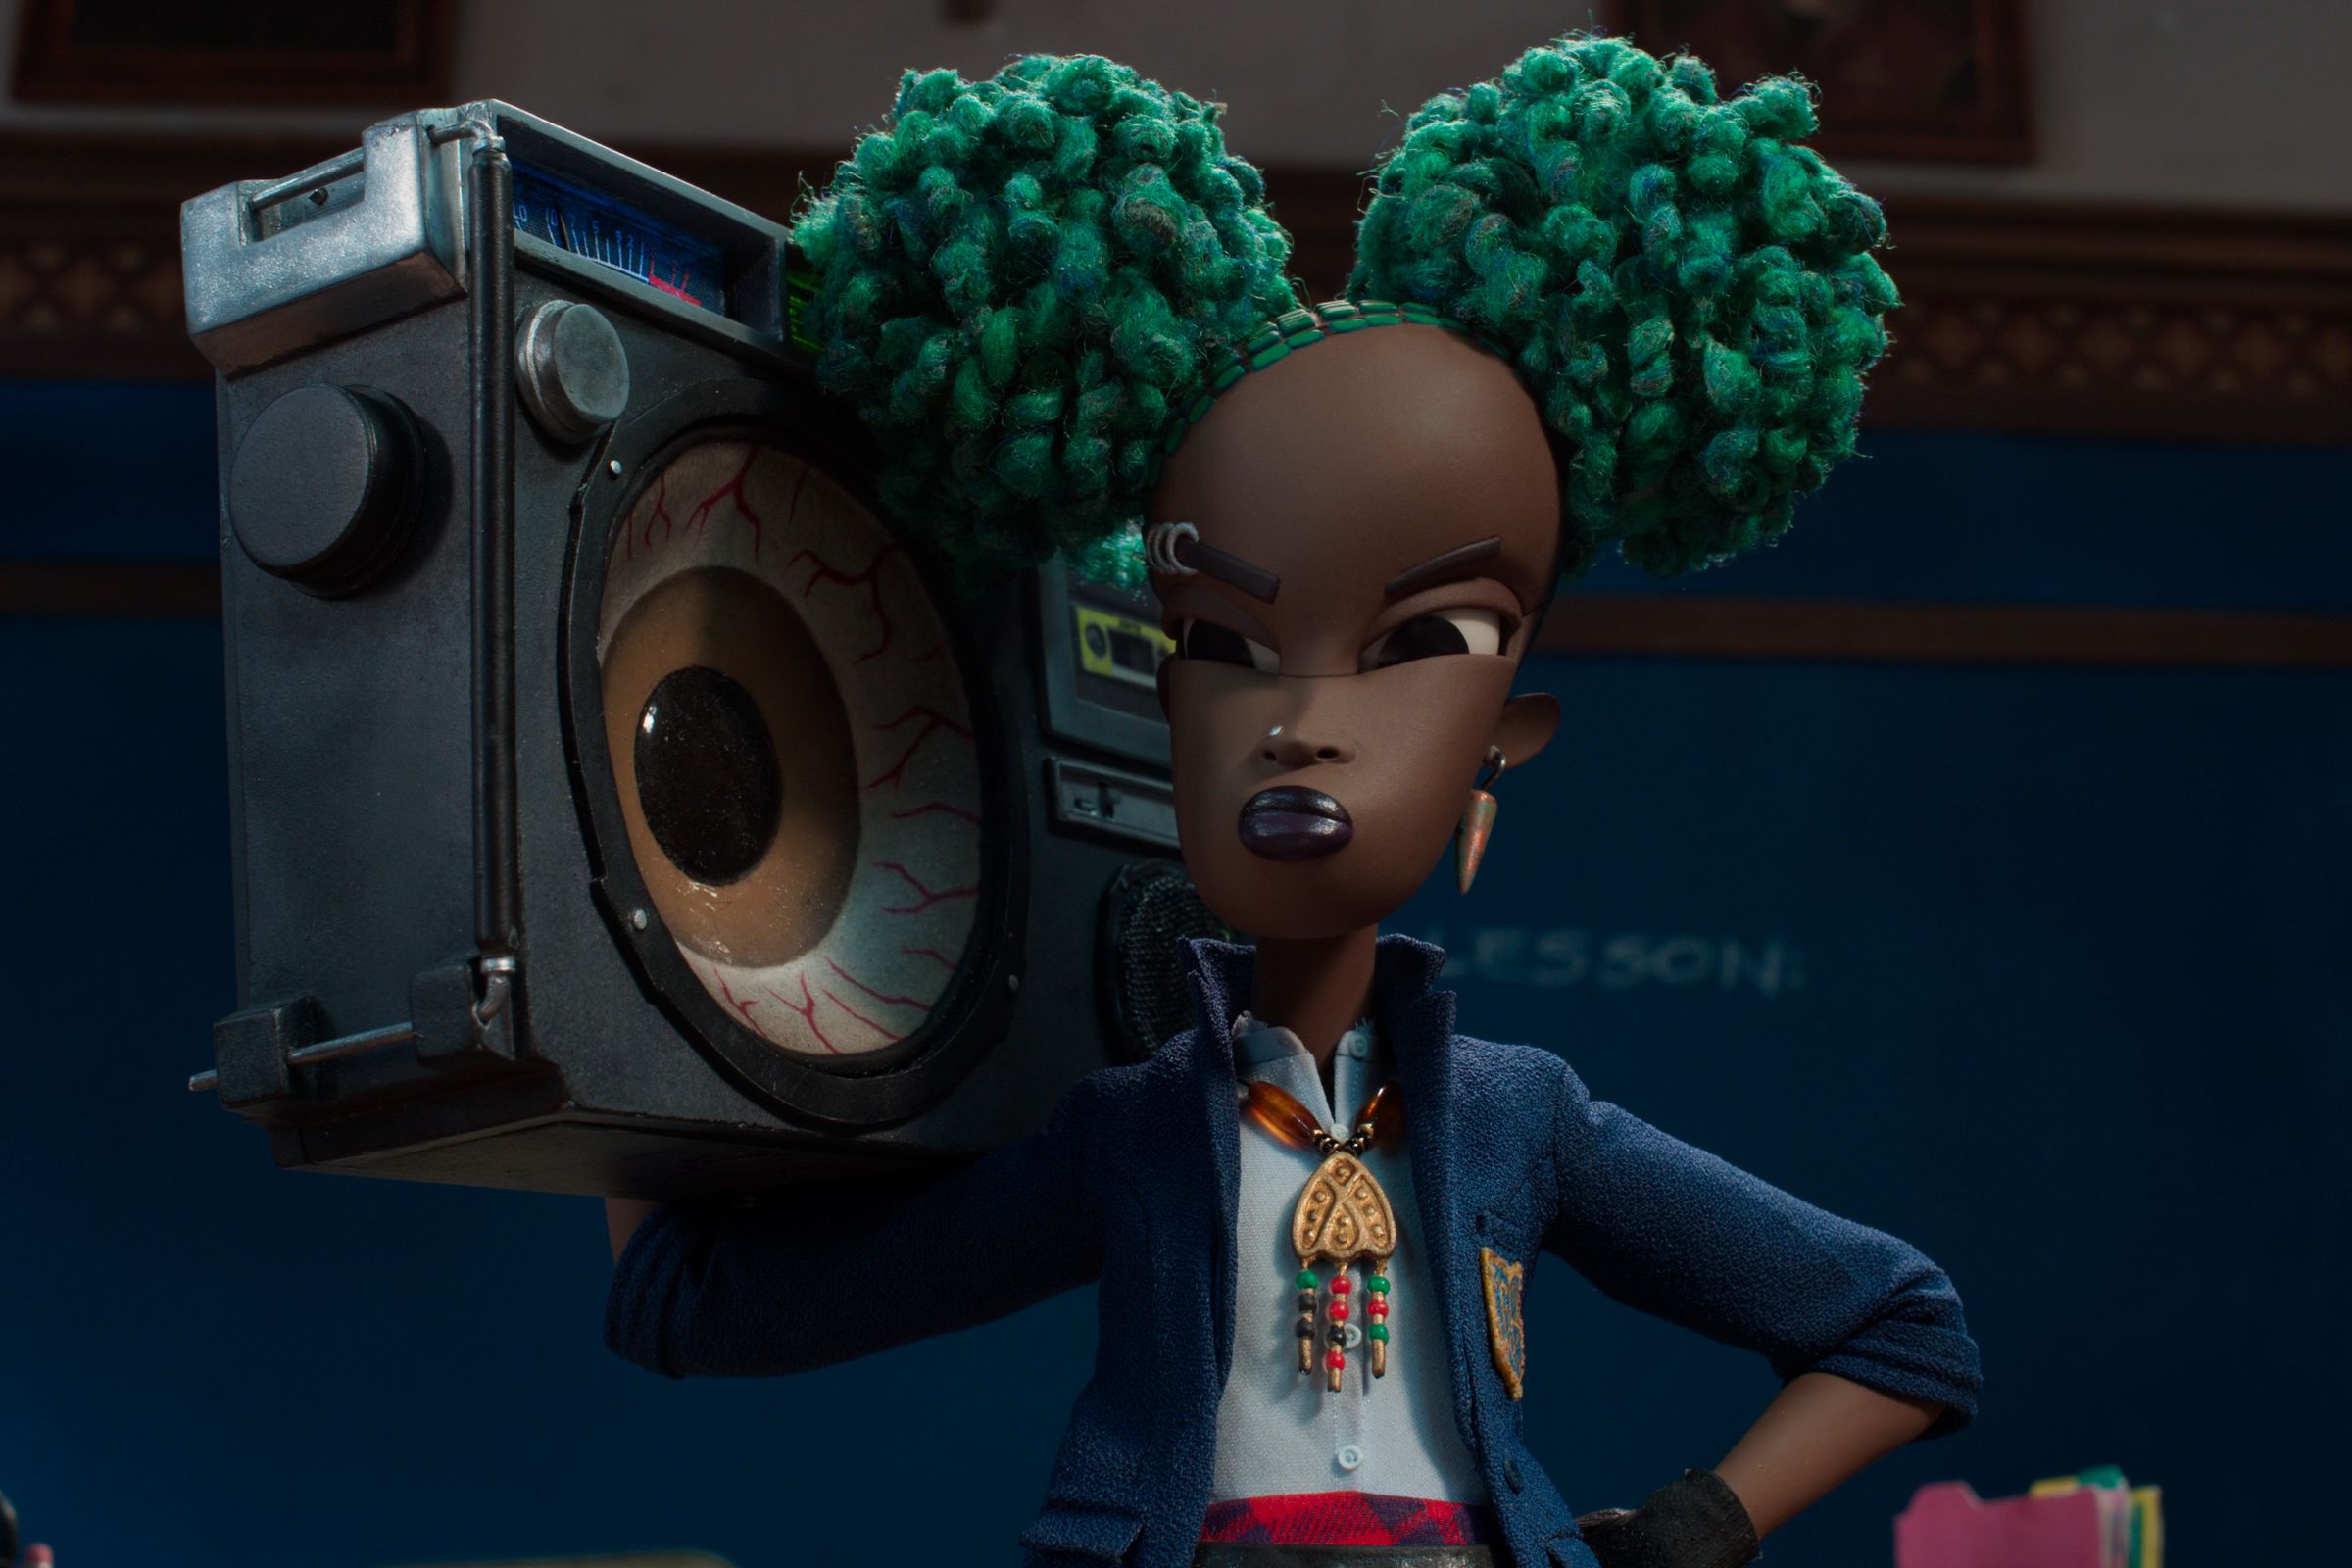 A girl with neon green afro puffs wearing a school blazer and carrying a boombox with a speaker that appears to be an eyeball. The girl is scowling and standing in front of a chalkboard.